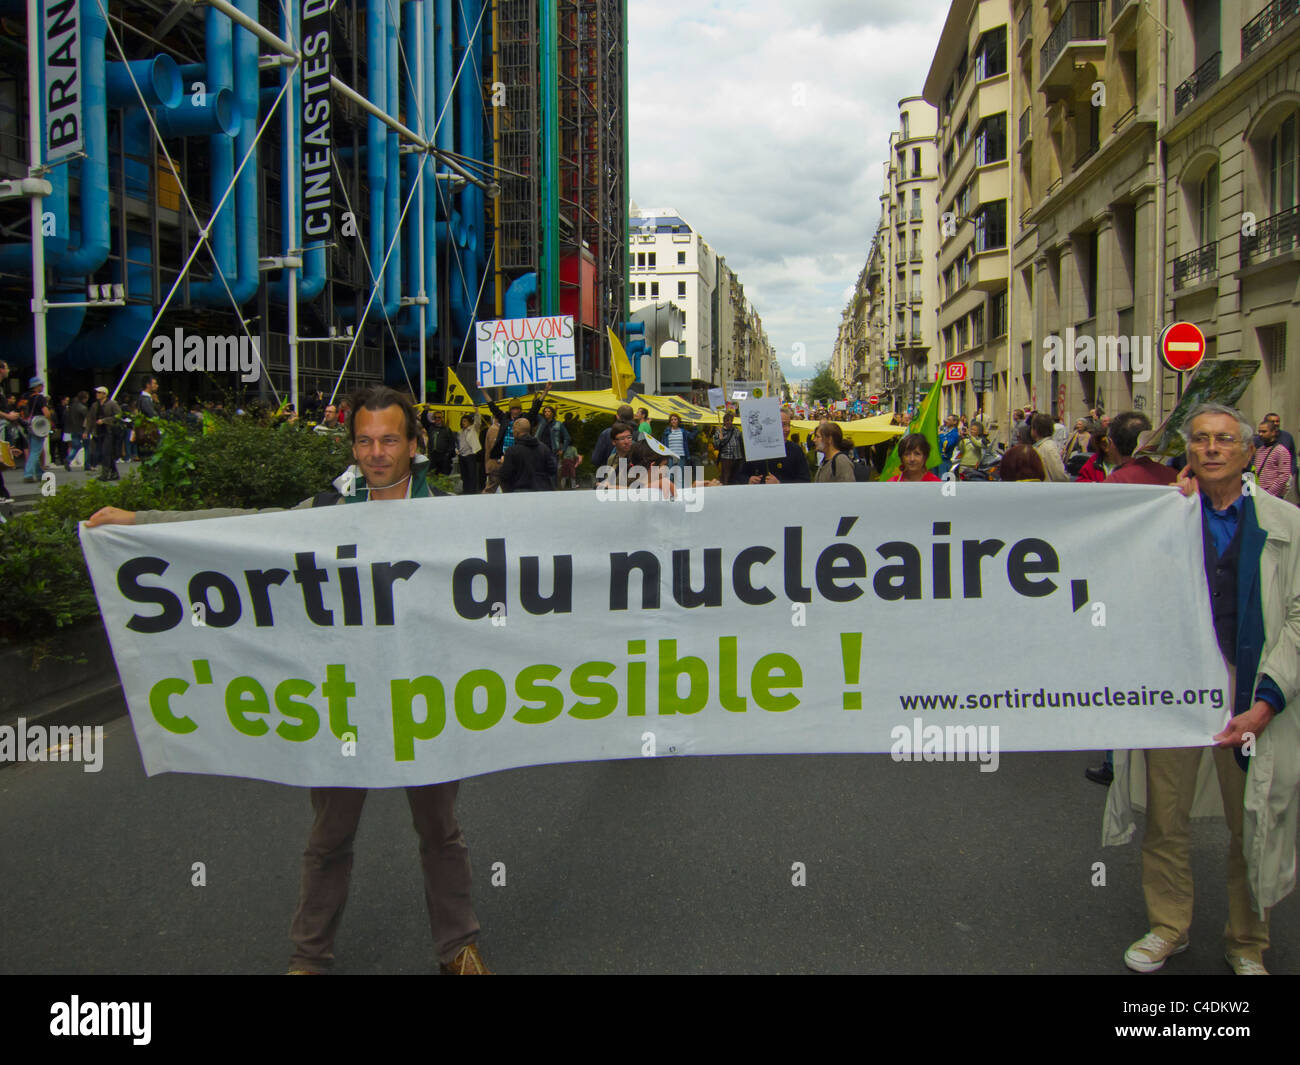 Paris, France, French Demonstration Against Nuclear Power, People Marching with Signs on Street 'Sortir du Nucleare' ('End Nuclear Power') nuclear energy protest Stock Photo